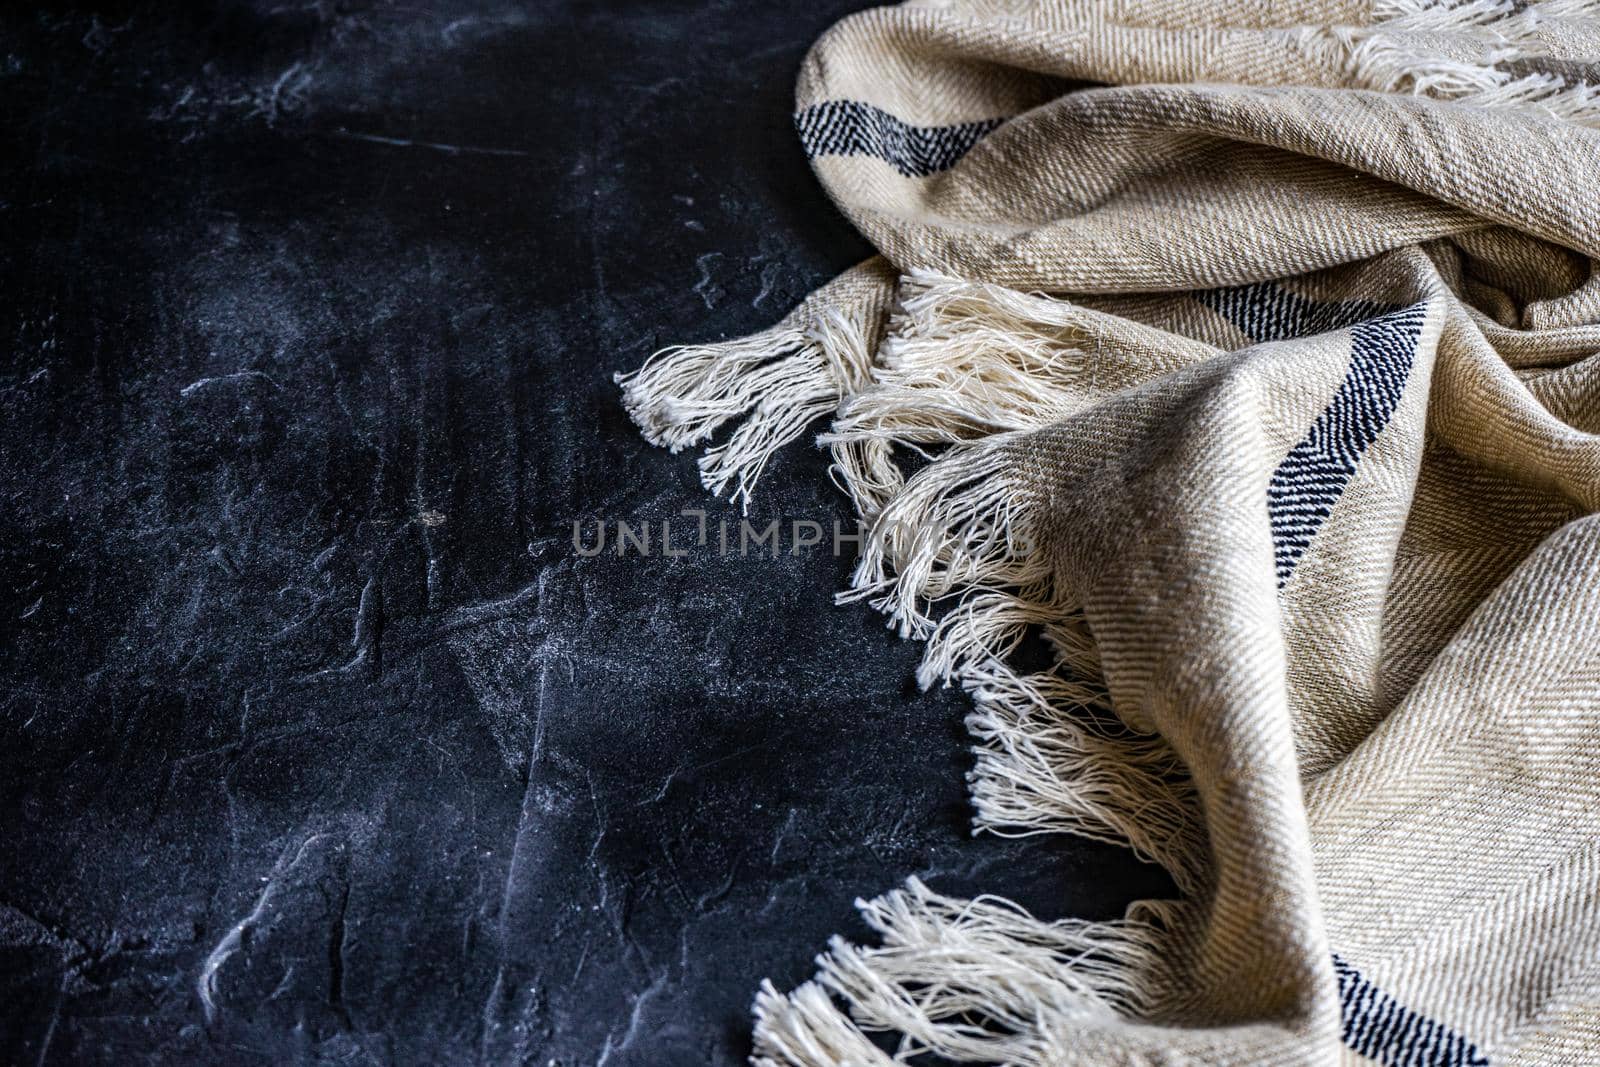 Rustic kitchen towel by Elet